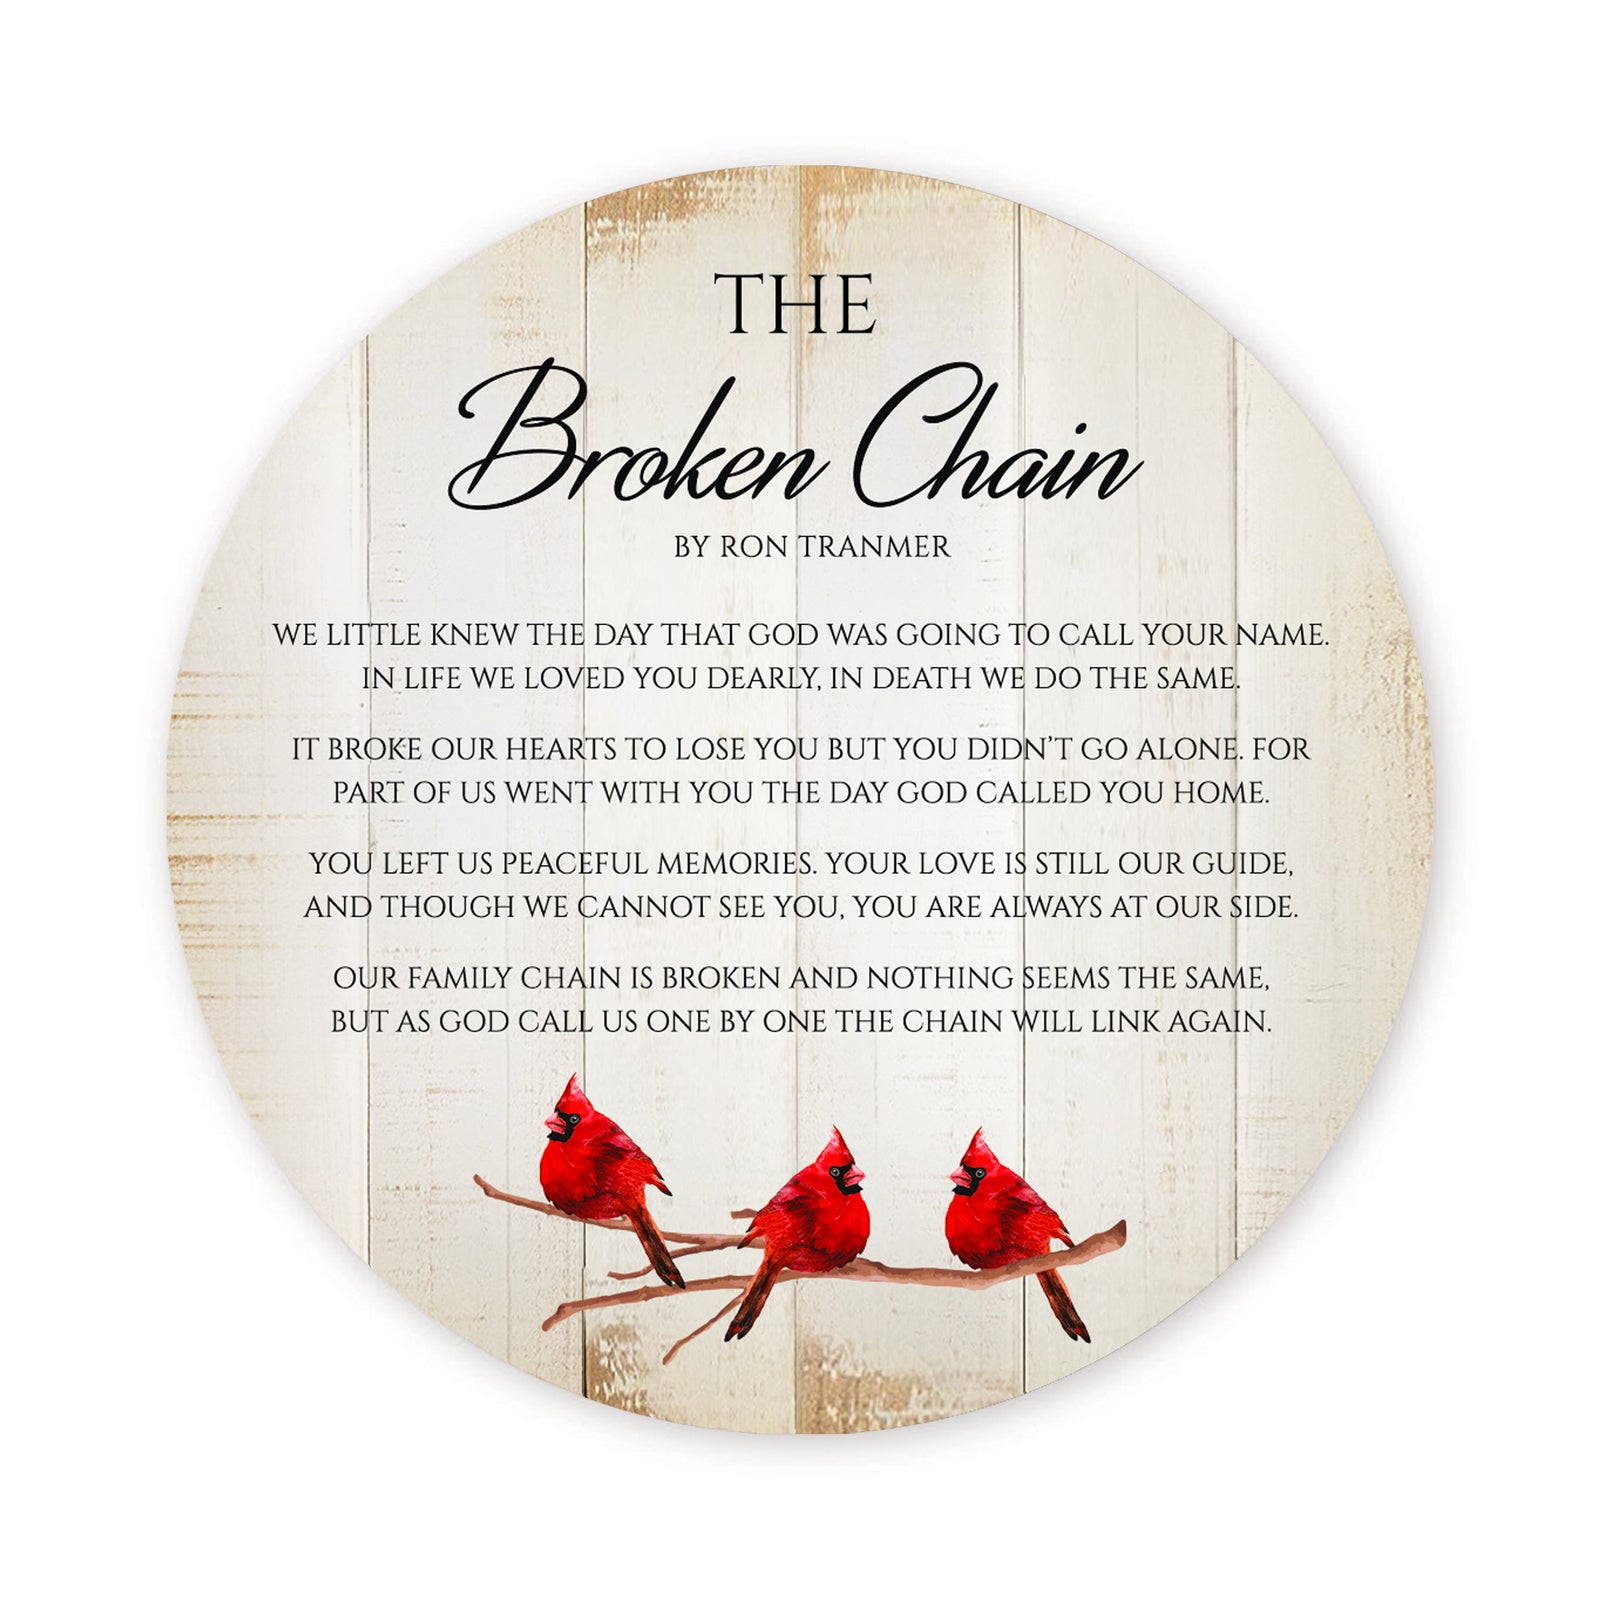 Vintage-Inspired Cardinal Wooden Magnet Printed With Everyday Inspirational Verses Gift Ideas - The Broken Chain